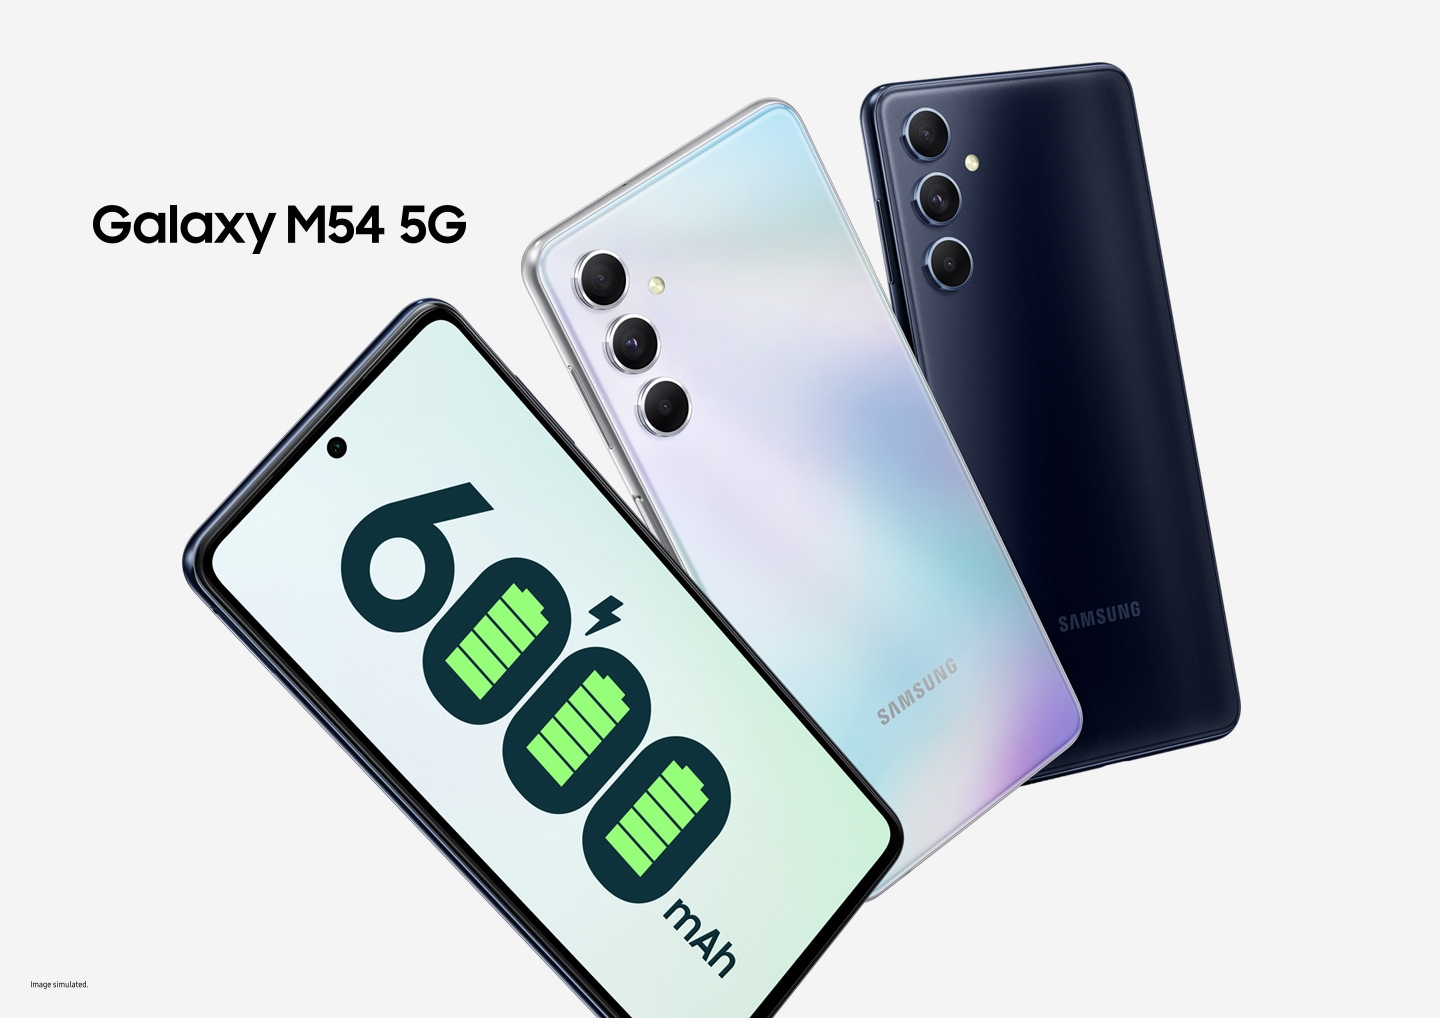 Three Galaxy M54 5G devices are spread out, device on the left showing the front screen with the typography "6000mAh", device on the center is showing the back angle in silver, device on the right is showing the back angle in dark navy.